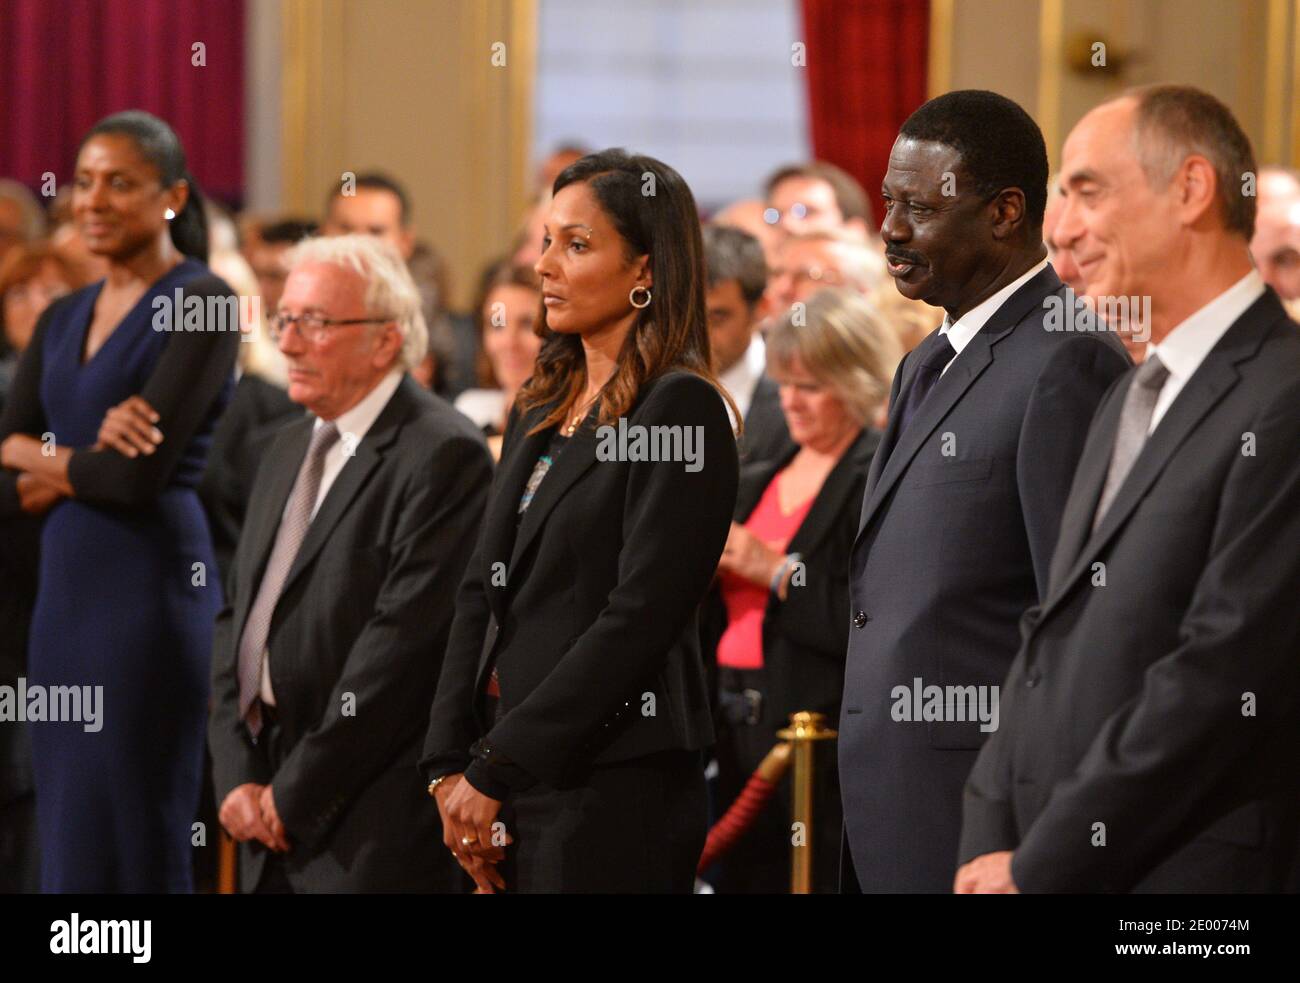 Triple Olympic Champion Marie-Jose Perec, sports journalist Jacques Vendroux, Legion of Honor and National Order of Merit insignia to 4x100m World champion Christine Arron, Former Olympique de Marseille football club's president Pape Diouf during a ceremony to award French sports personalities at the Elysee Palace in Paris, France on October 9, 2013. Photo by Christian Liewig/ABACAPRESS.COM Stock Photo